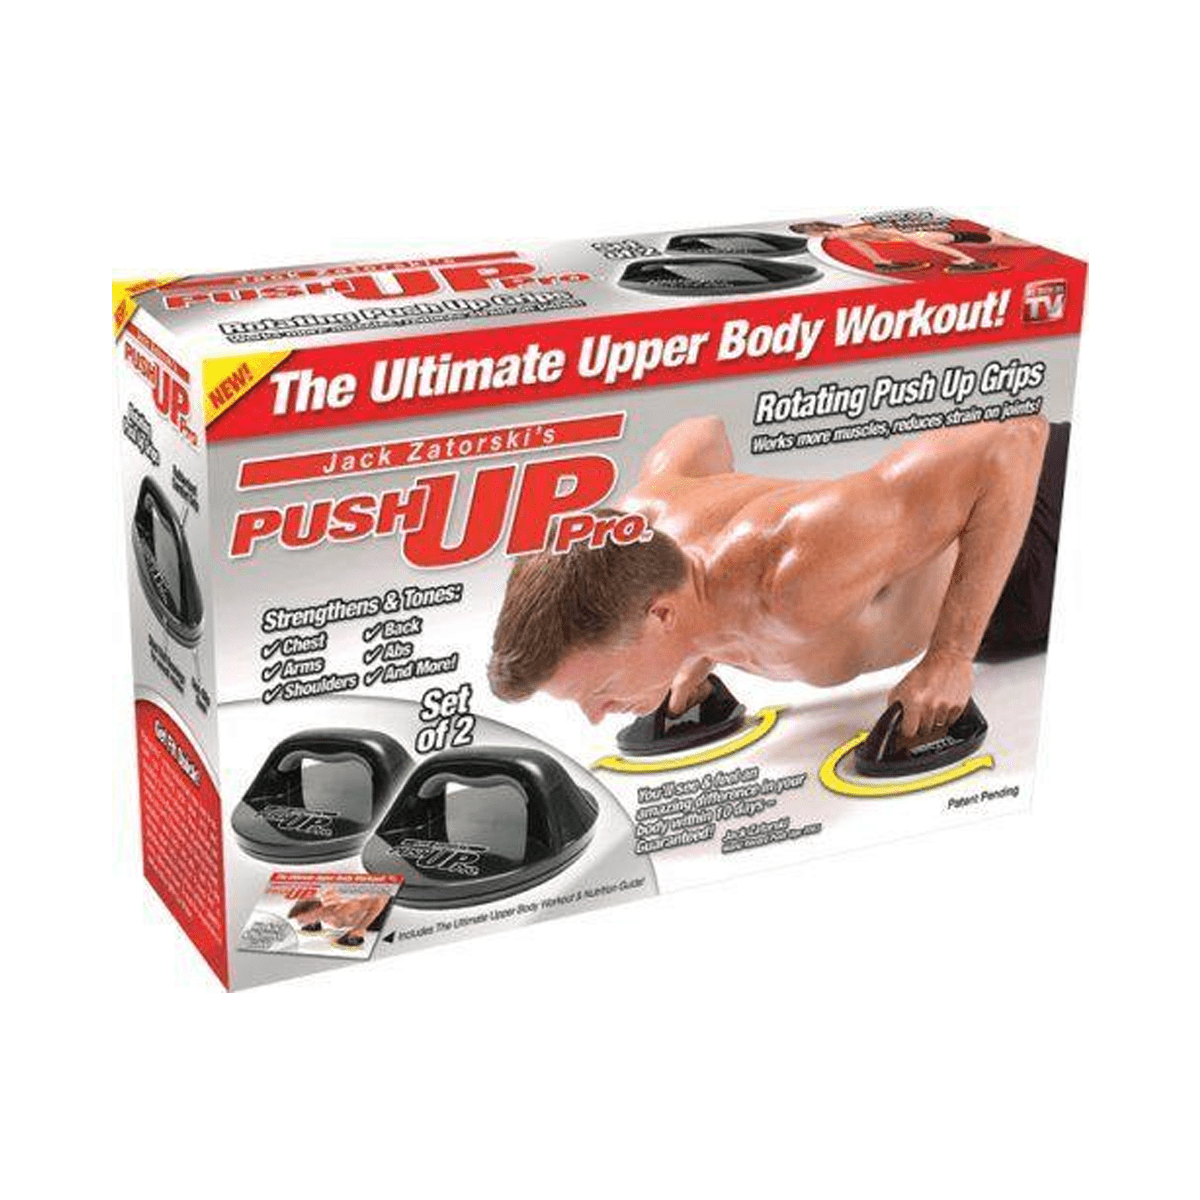 Professional Push Up Pro, The Ultimate Upper Body Workout